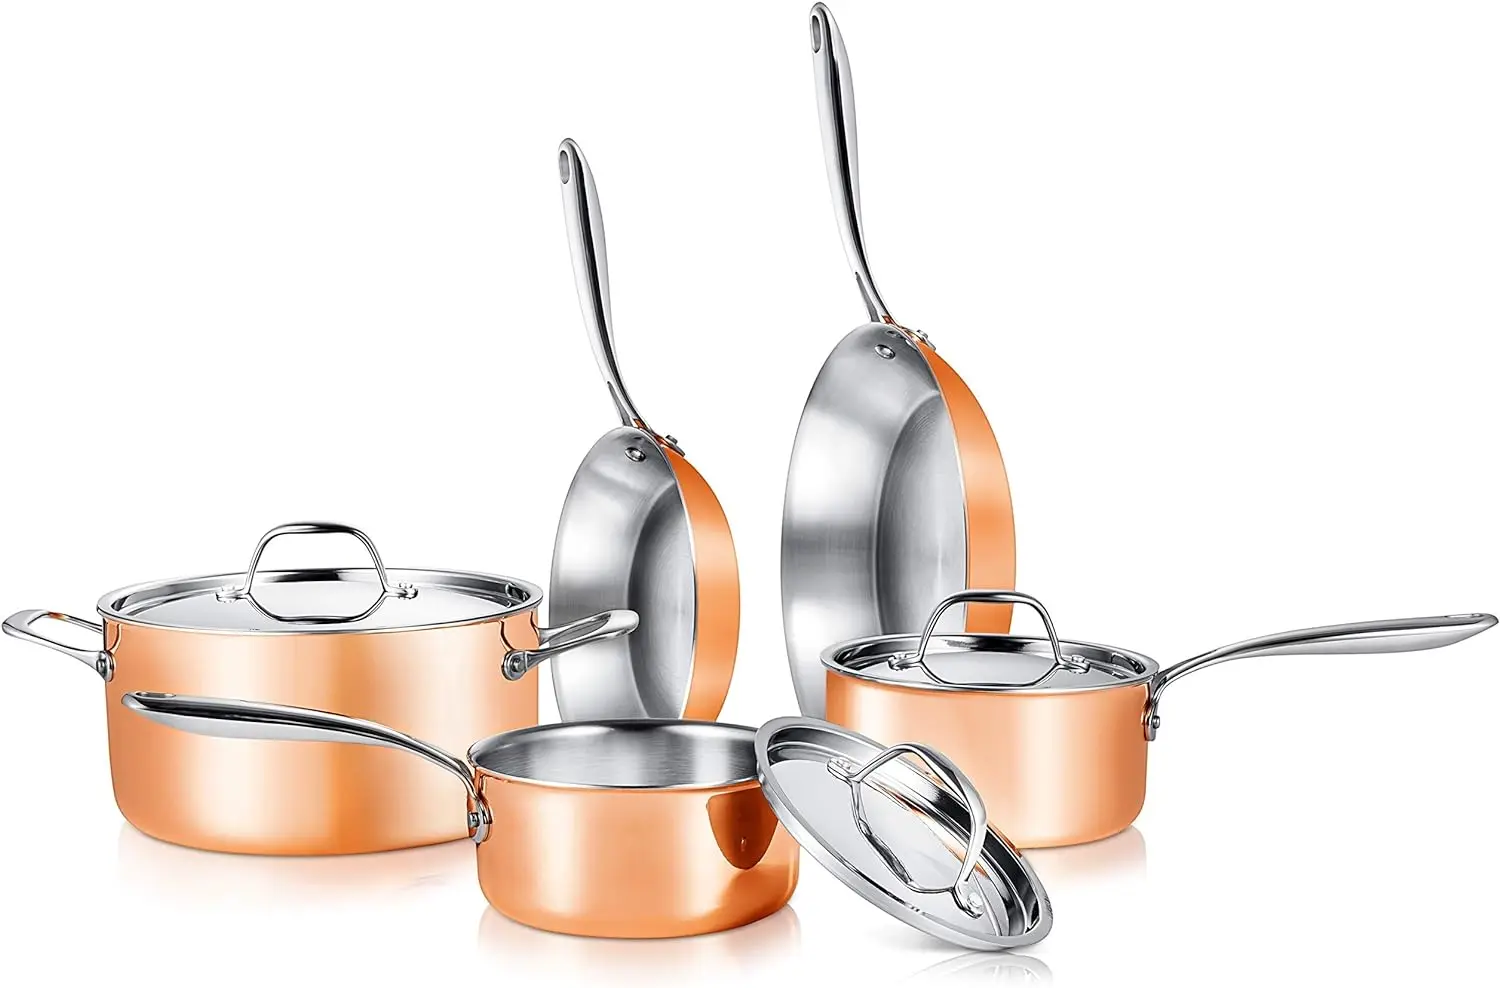 

Pcs. Stainless Steel Kitchenware Pots & Pans Set Stylish Kitchen Cookware w/Cast SS Handle, Tri-Ply Authentic Copper, for Sa Lar